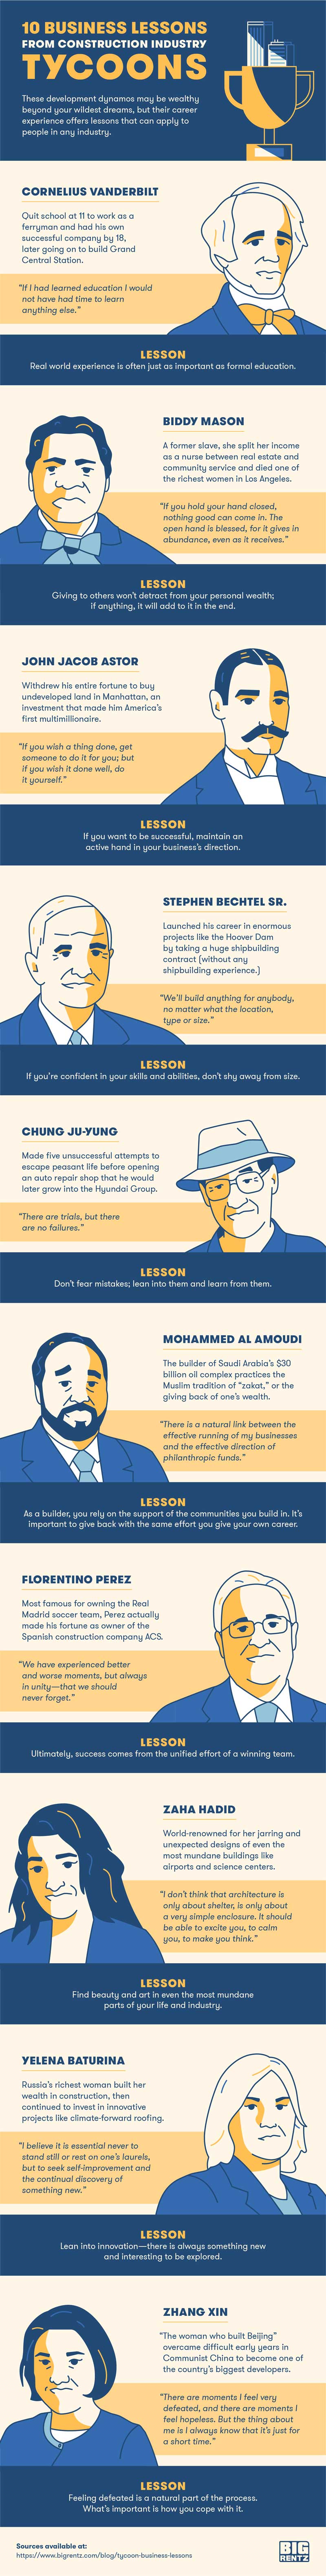 Infographic 10 Business Lessons from Construction Tycoons